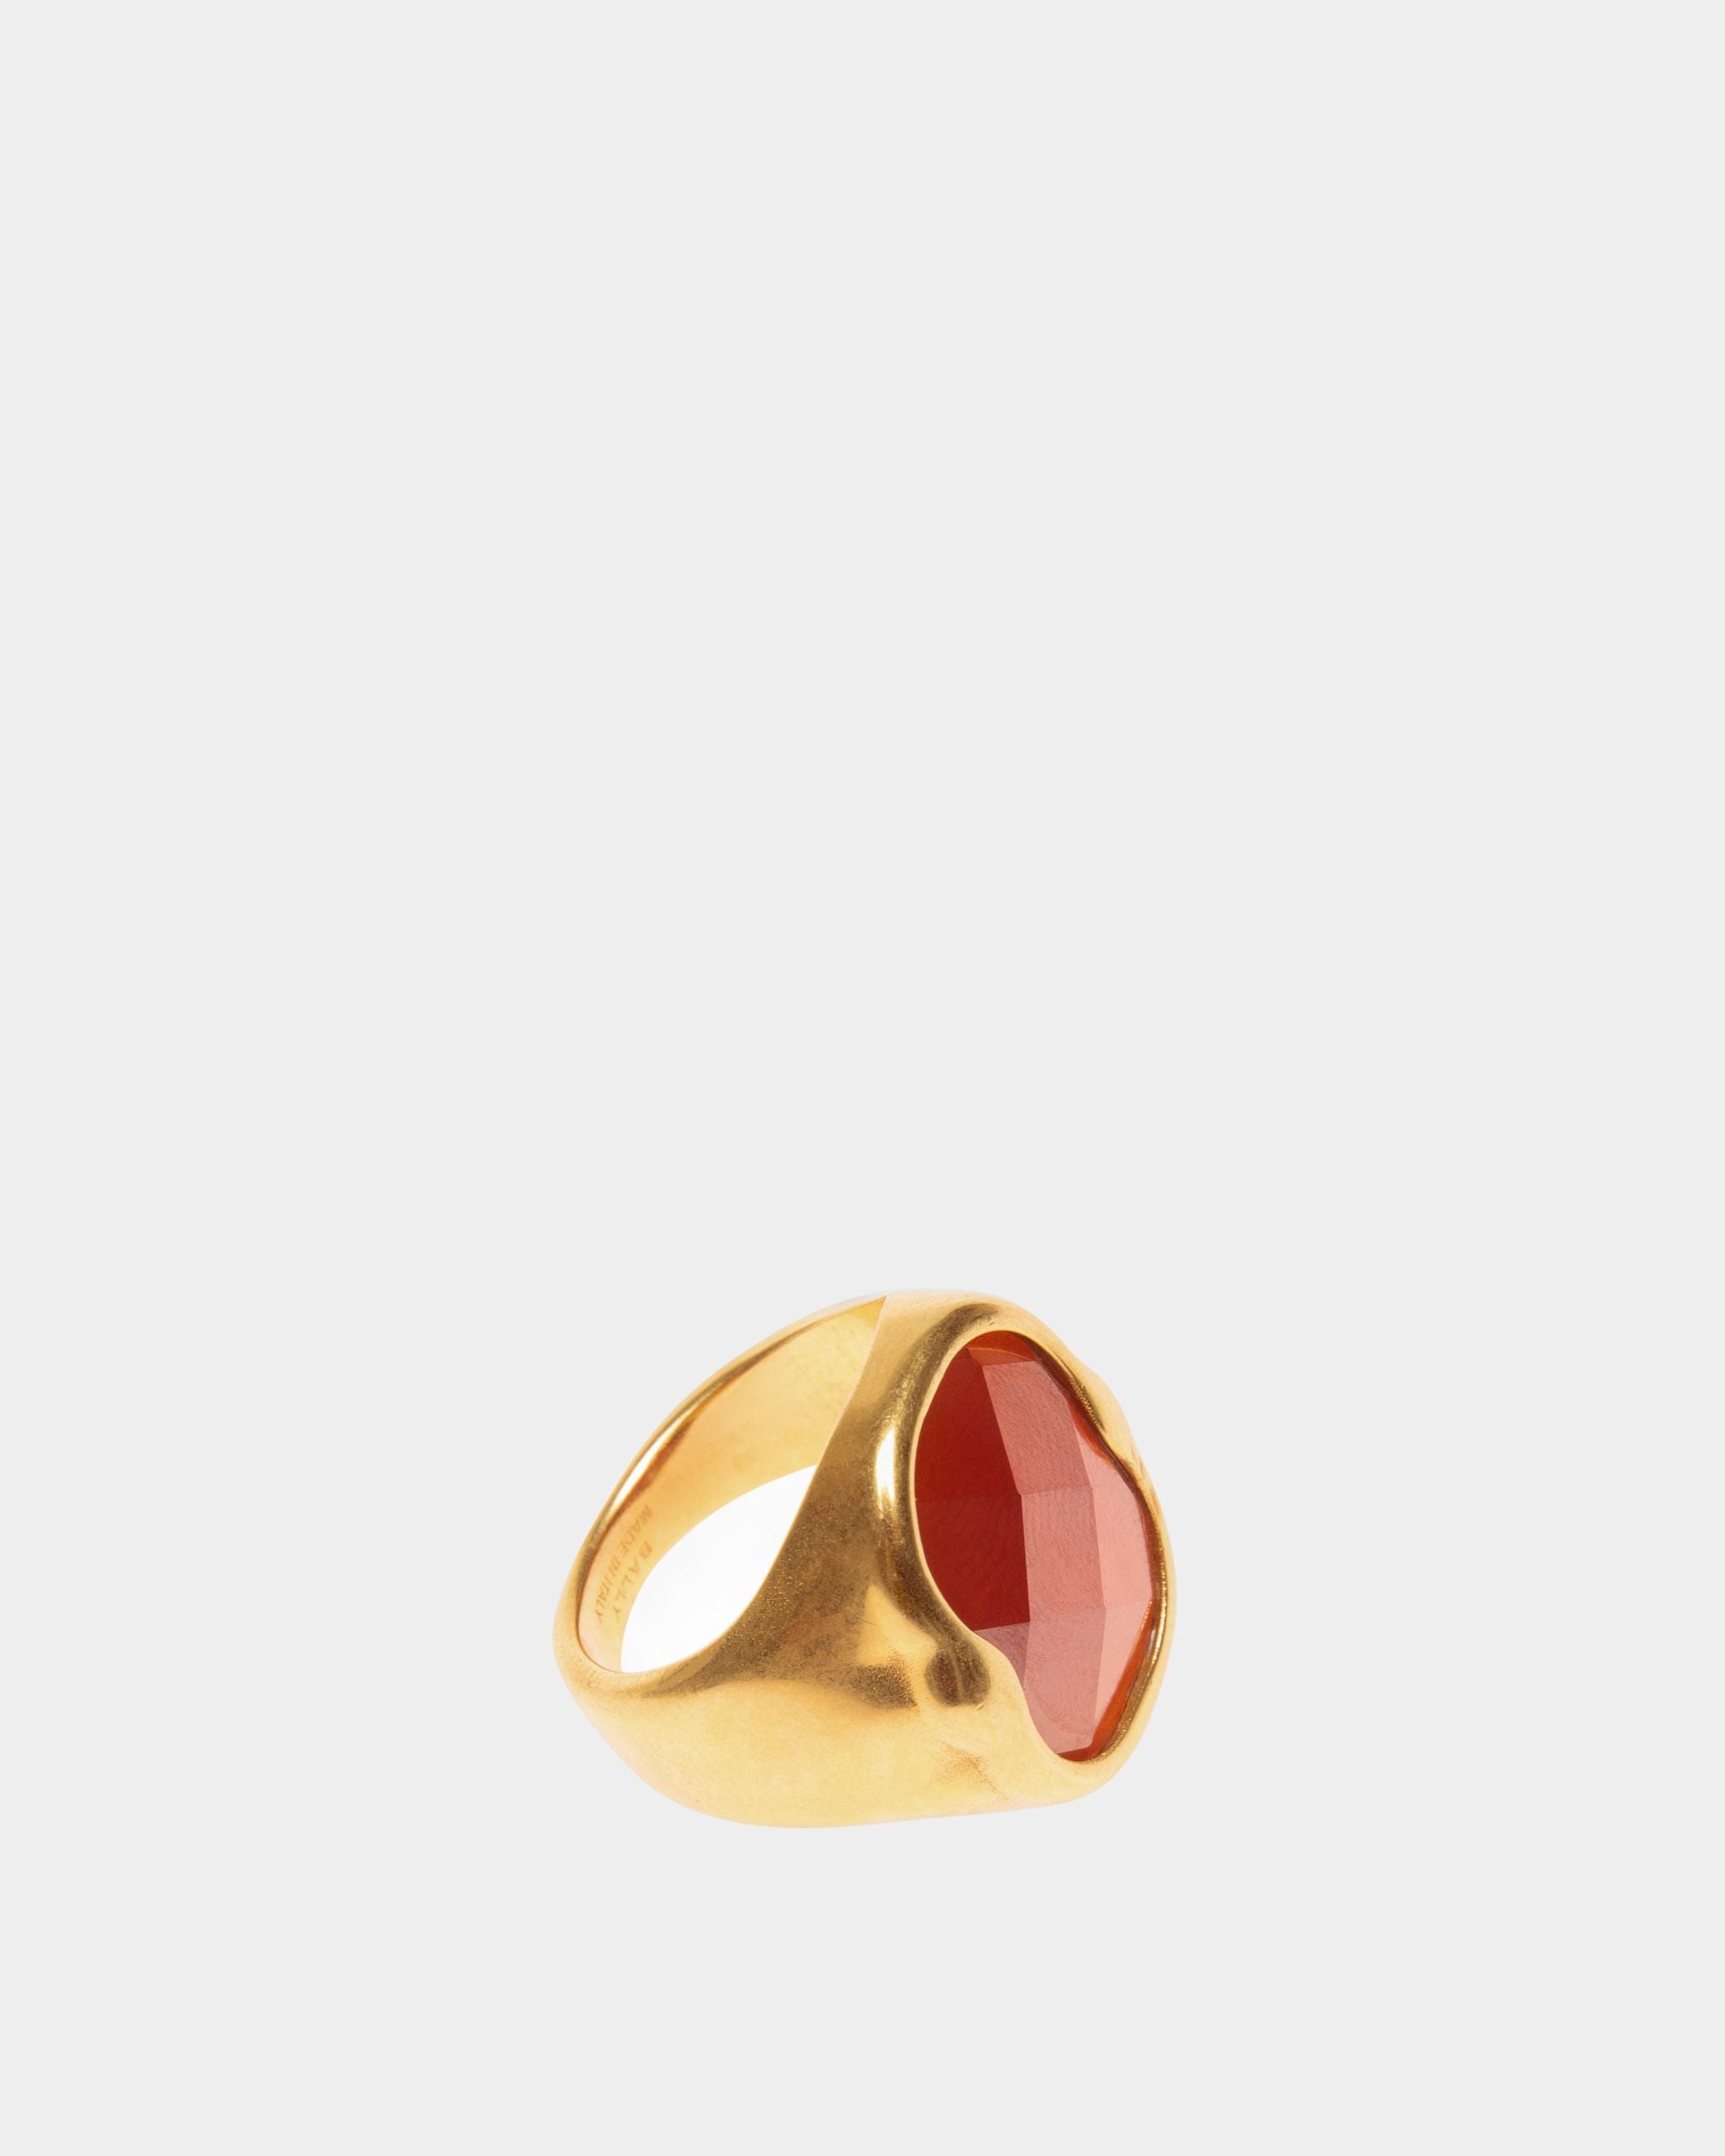 Frame Ring | Women's Ring | Hammered Gold | Bally | Still Life Front